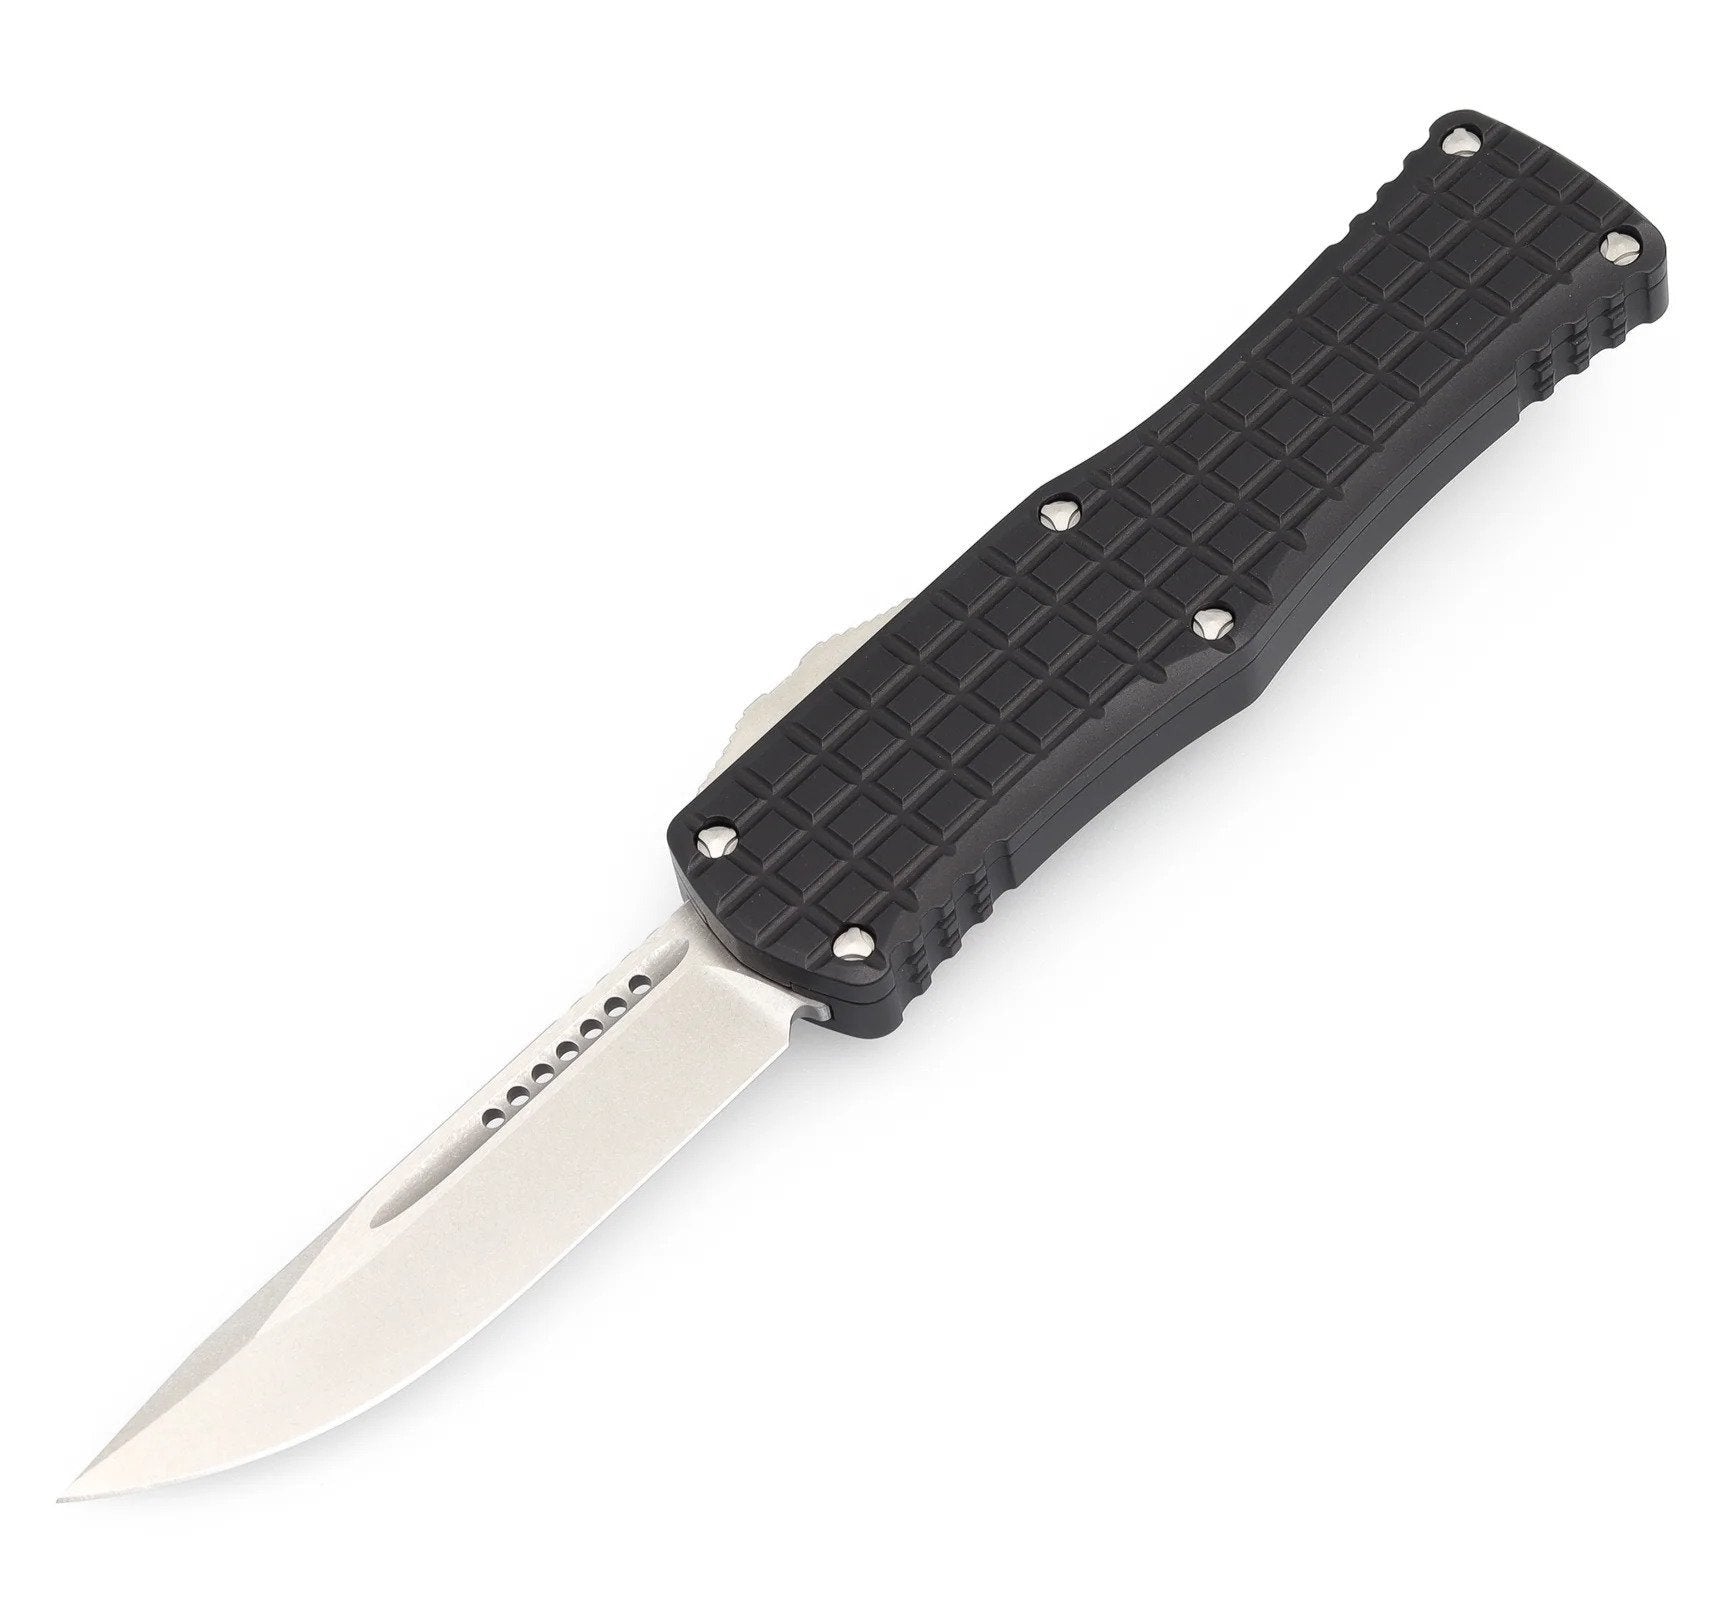 Microtech Hera - Signature Series - Frag Black Chassis - Single Edge Blade - 703-10FRS